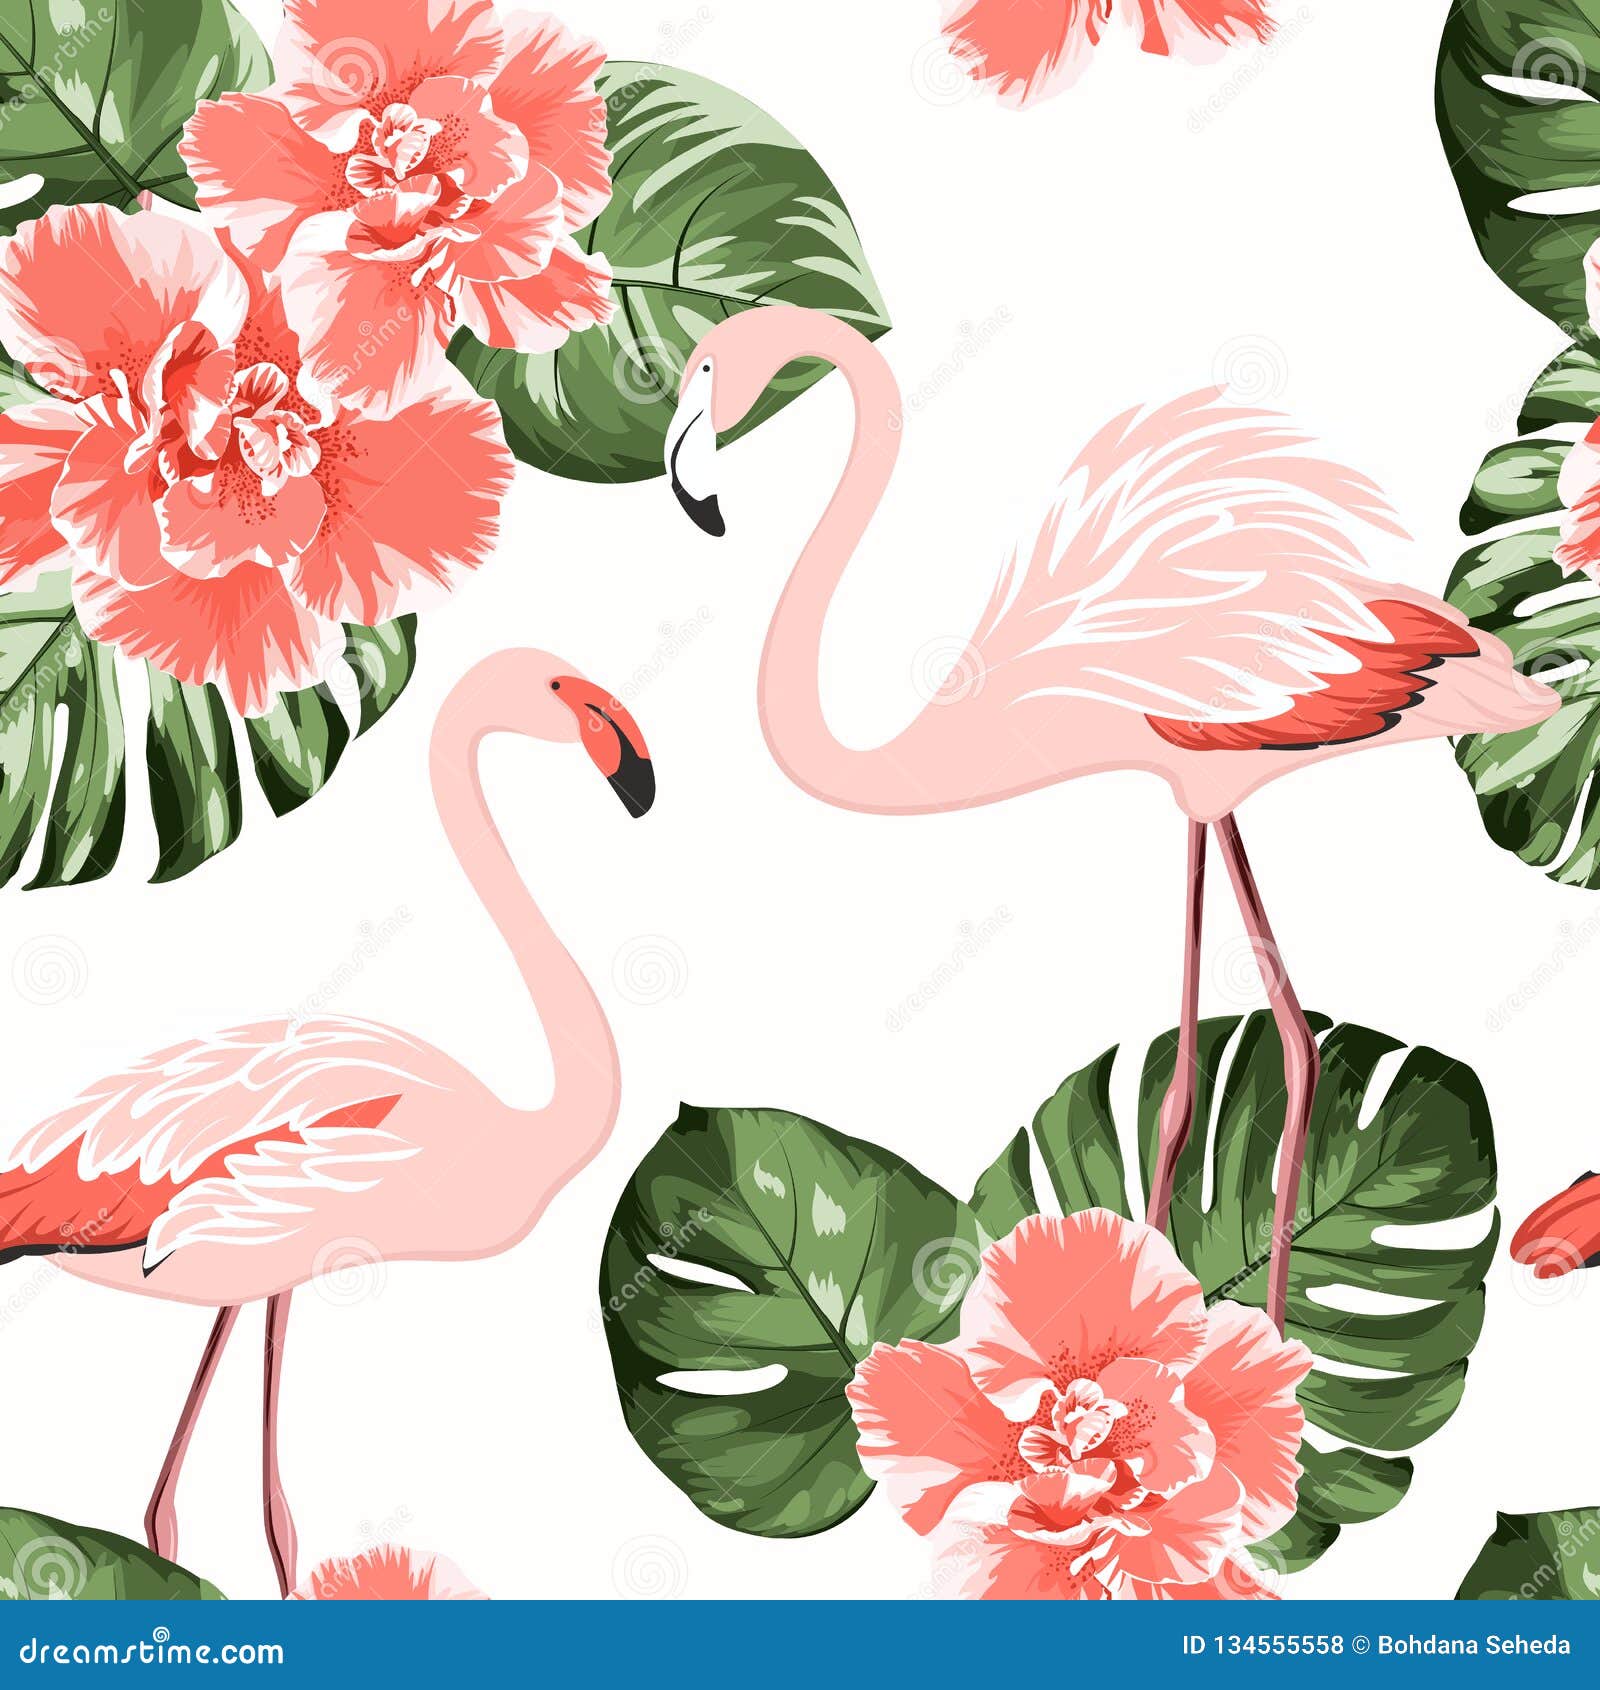 bright crimson camelia flowers, exotic pink flamingo birds, tropical monstera philodendron green leaves seamless pattern